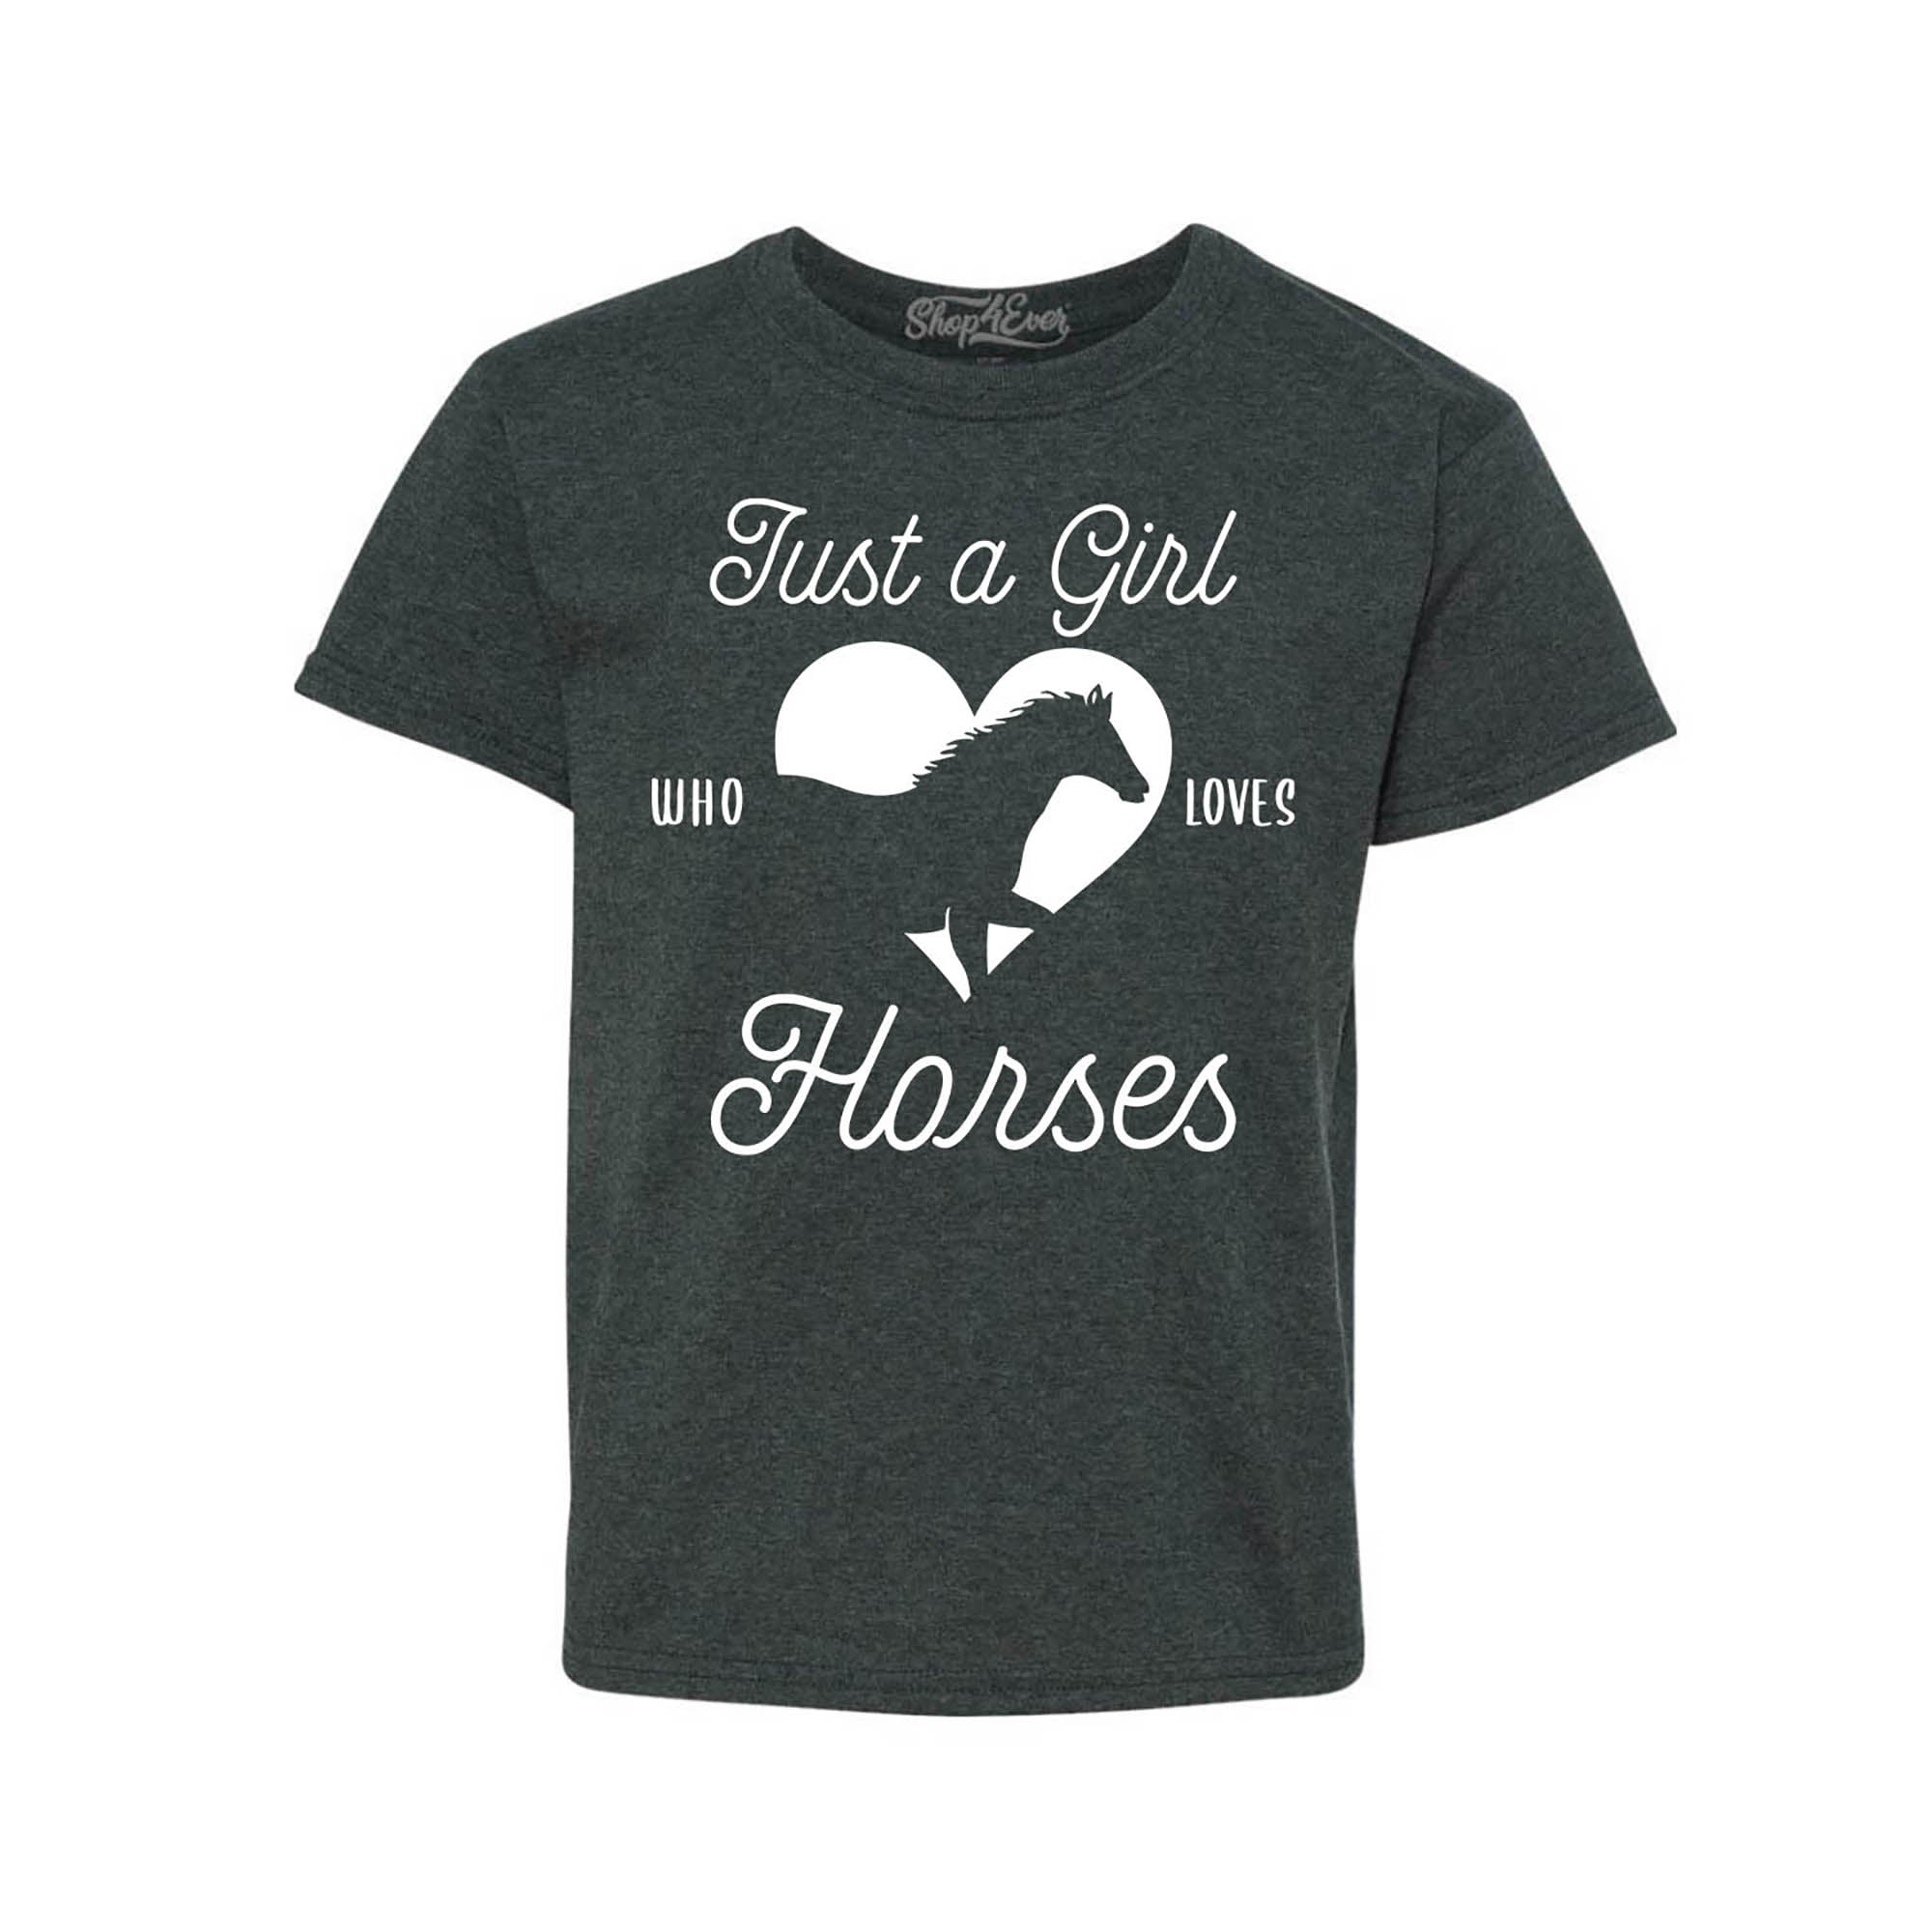 Just A Girl Who Loves Horses Youth's T-Shirt